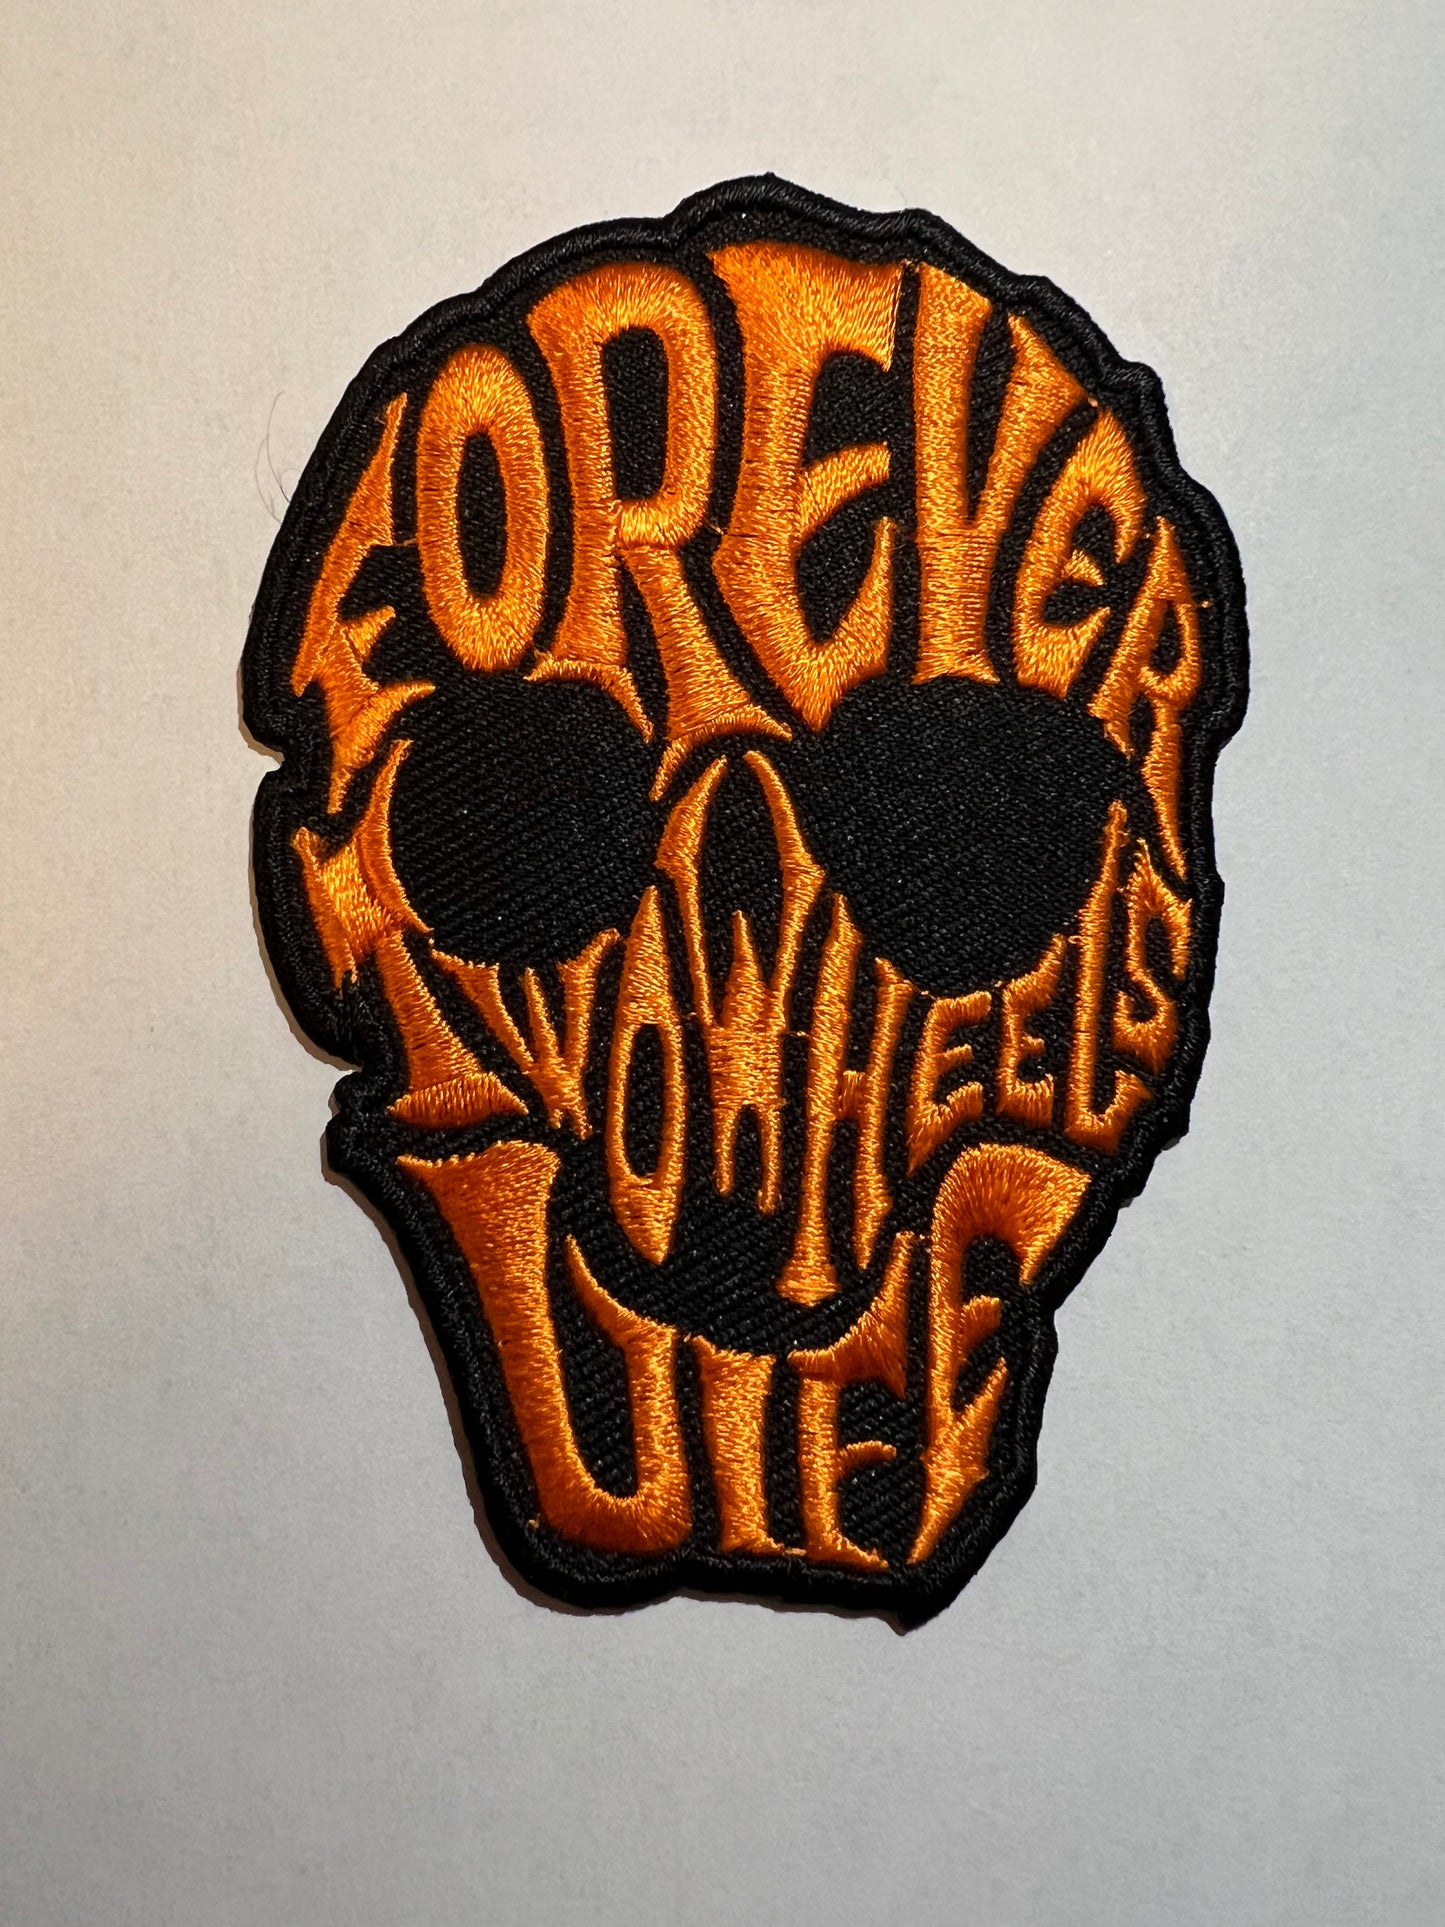 Forever Two Wheels Patch